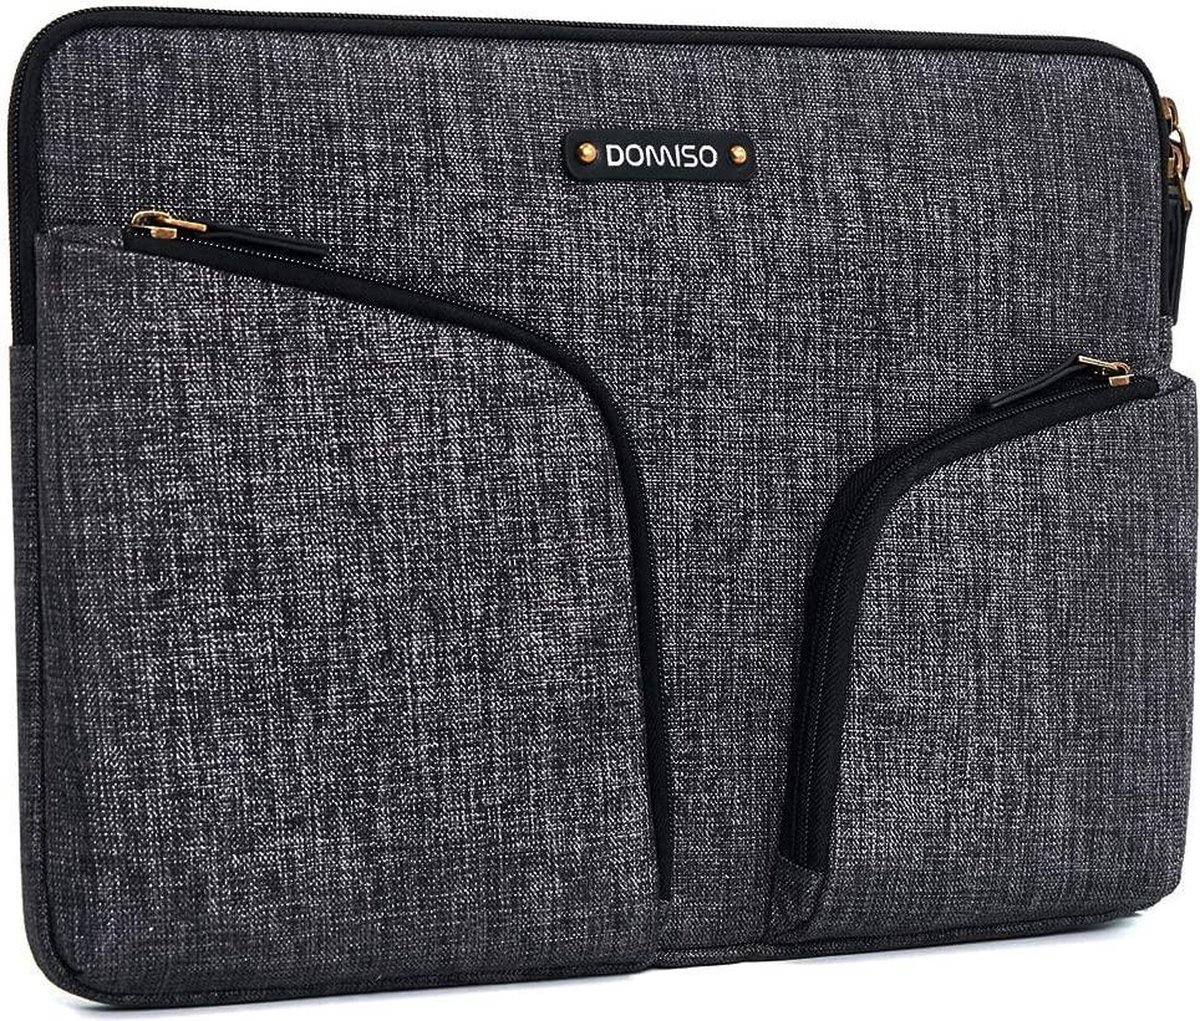 Selwo 11-11,6 inch waterdichte laptophoes notebooktas beschermhoes canvas voor 11,6 inch MacBook Air / 12,3 inch Microsoft Surface Pro/Acer/Asus/Dell/Fujitsu/Lenovo/HP/Samsung, donkergrijs